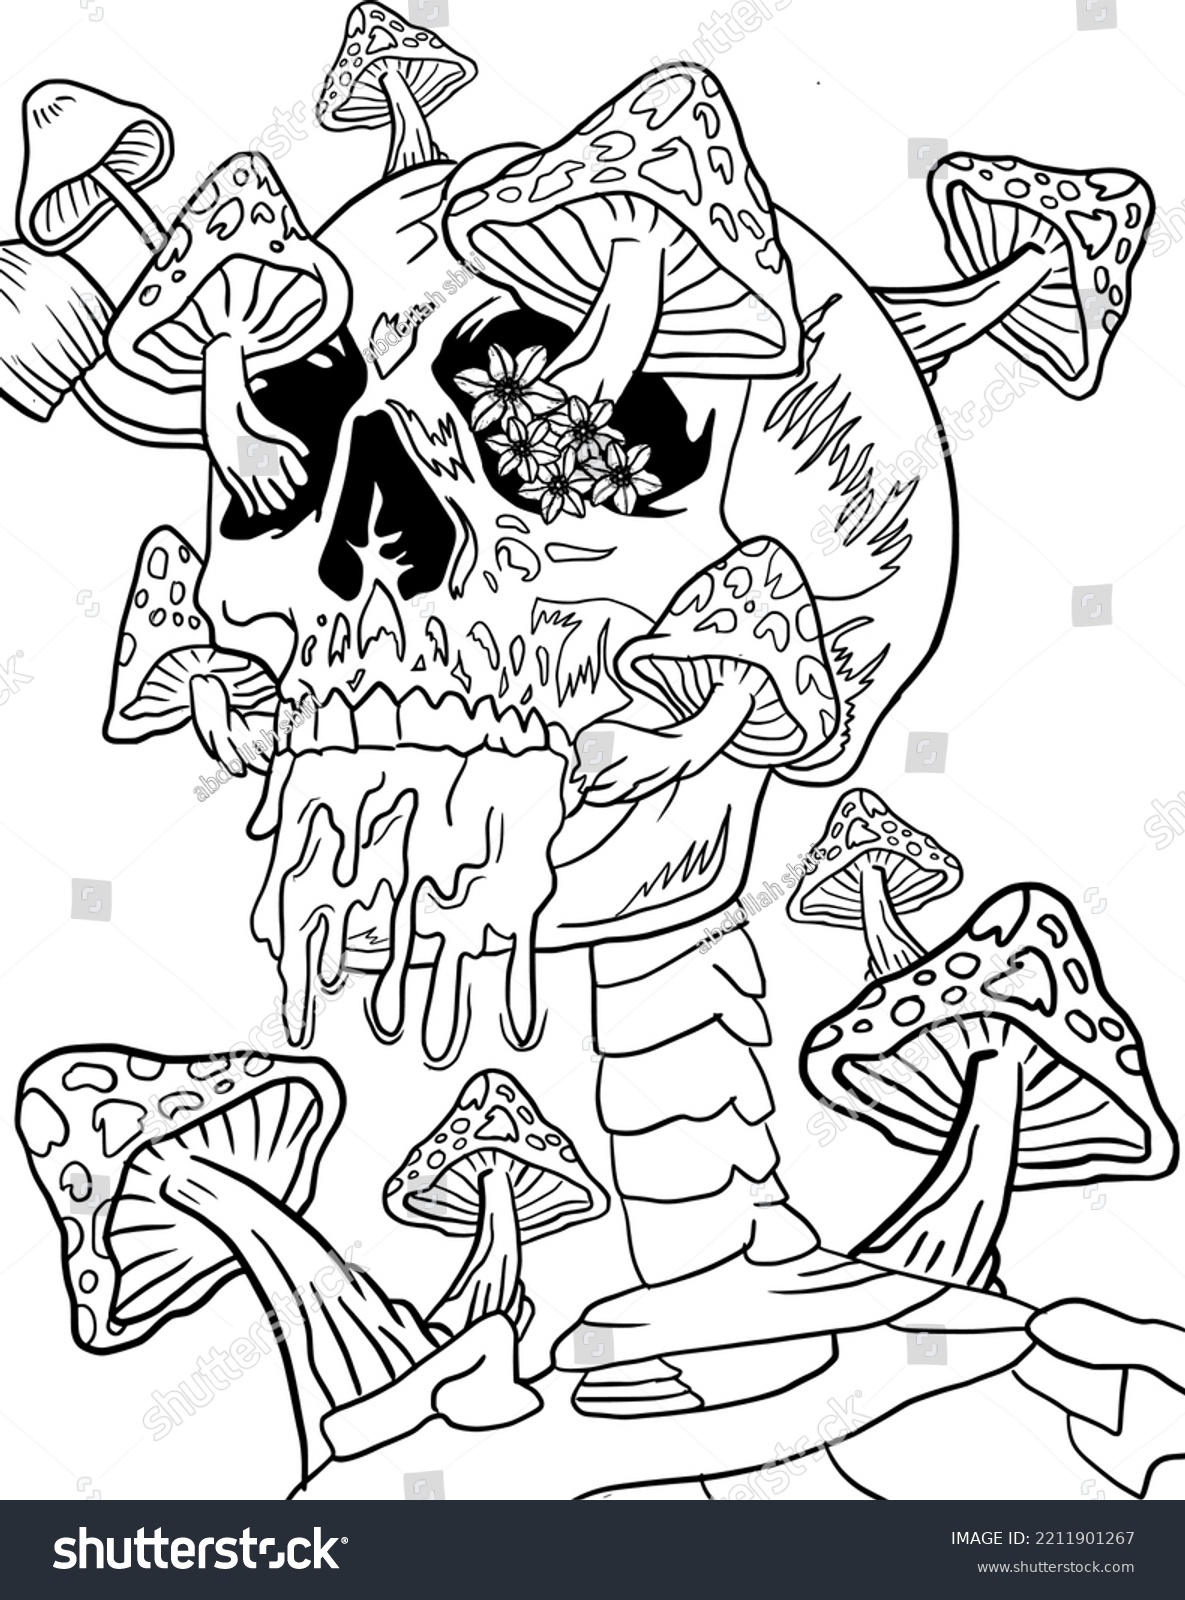 stoner-trippy-coloring-page-fun-coloring-stock-vector-royalty-free